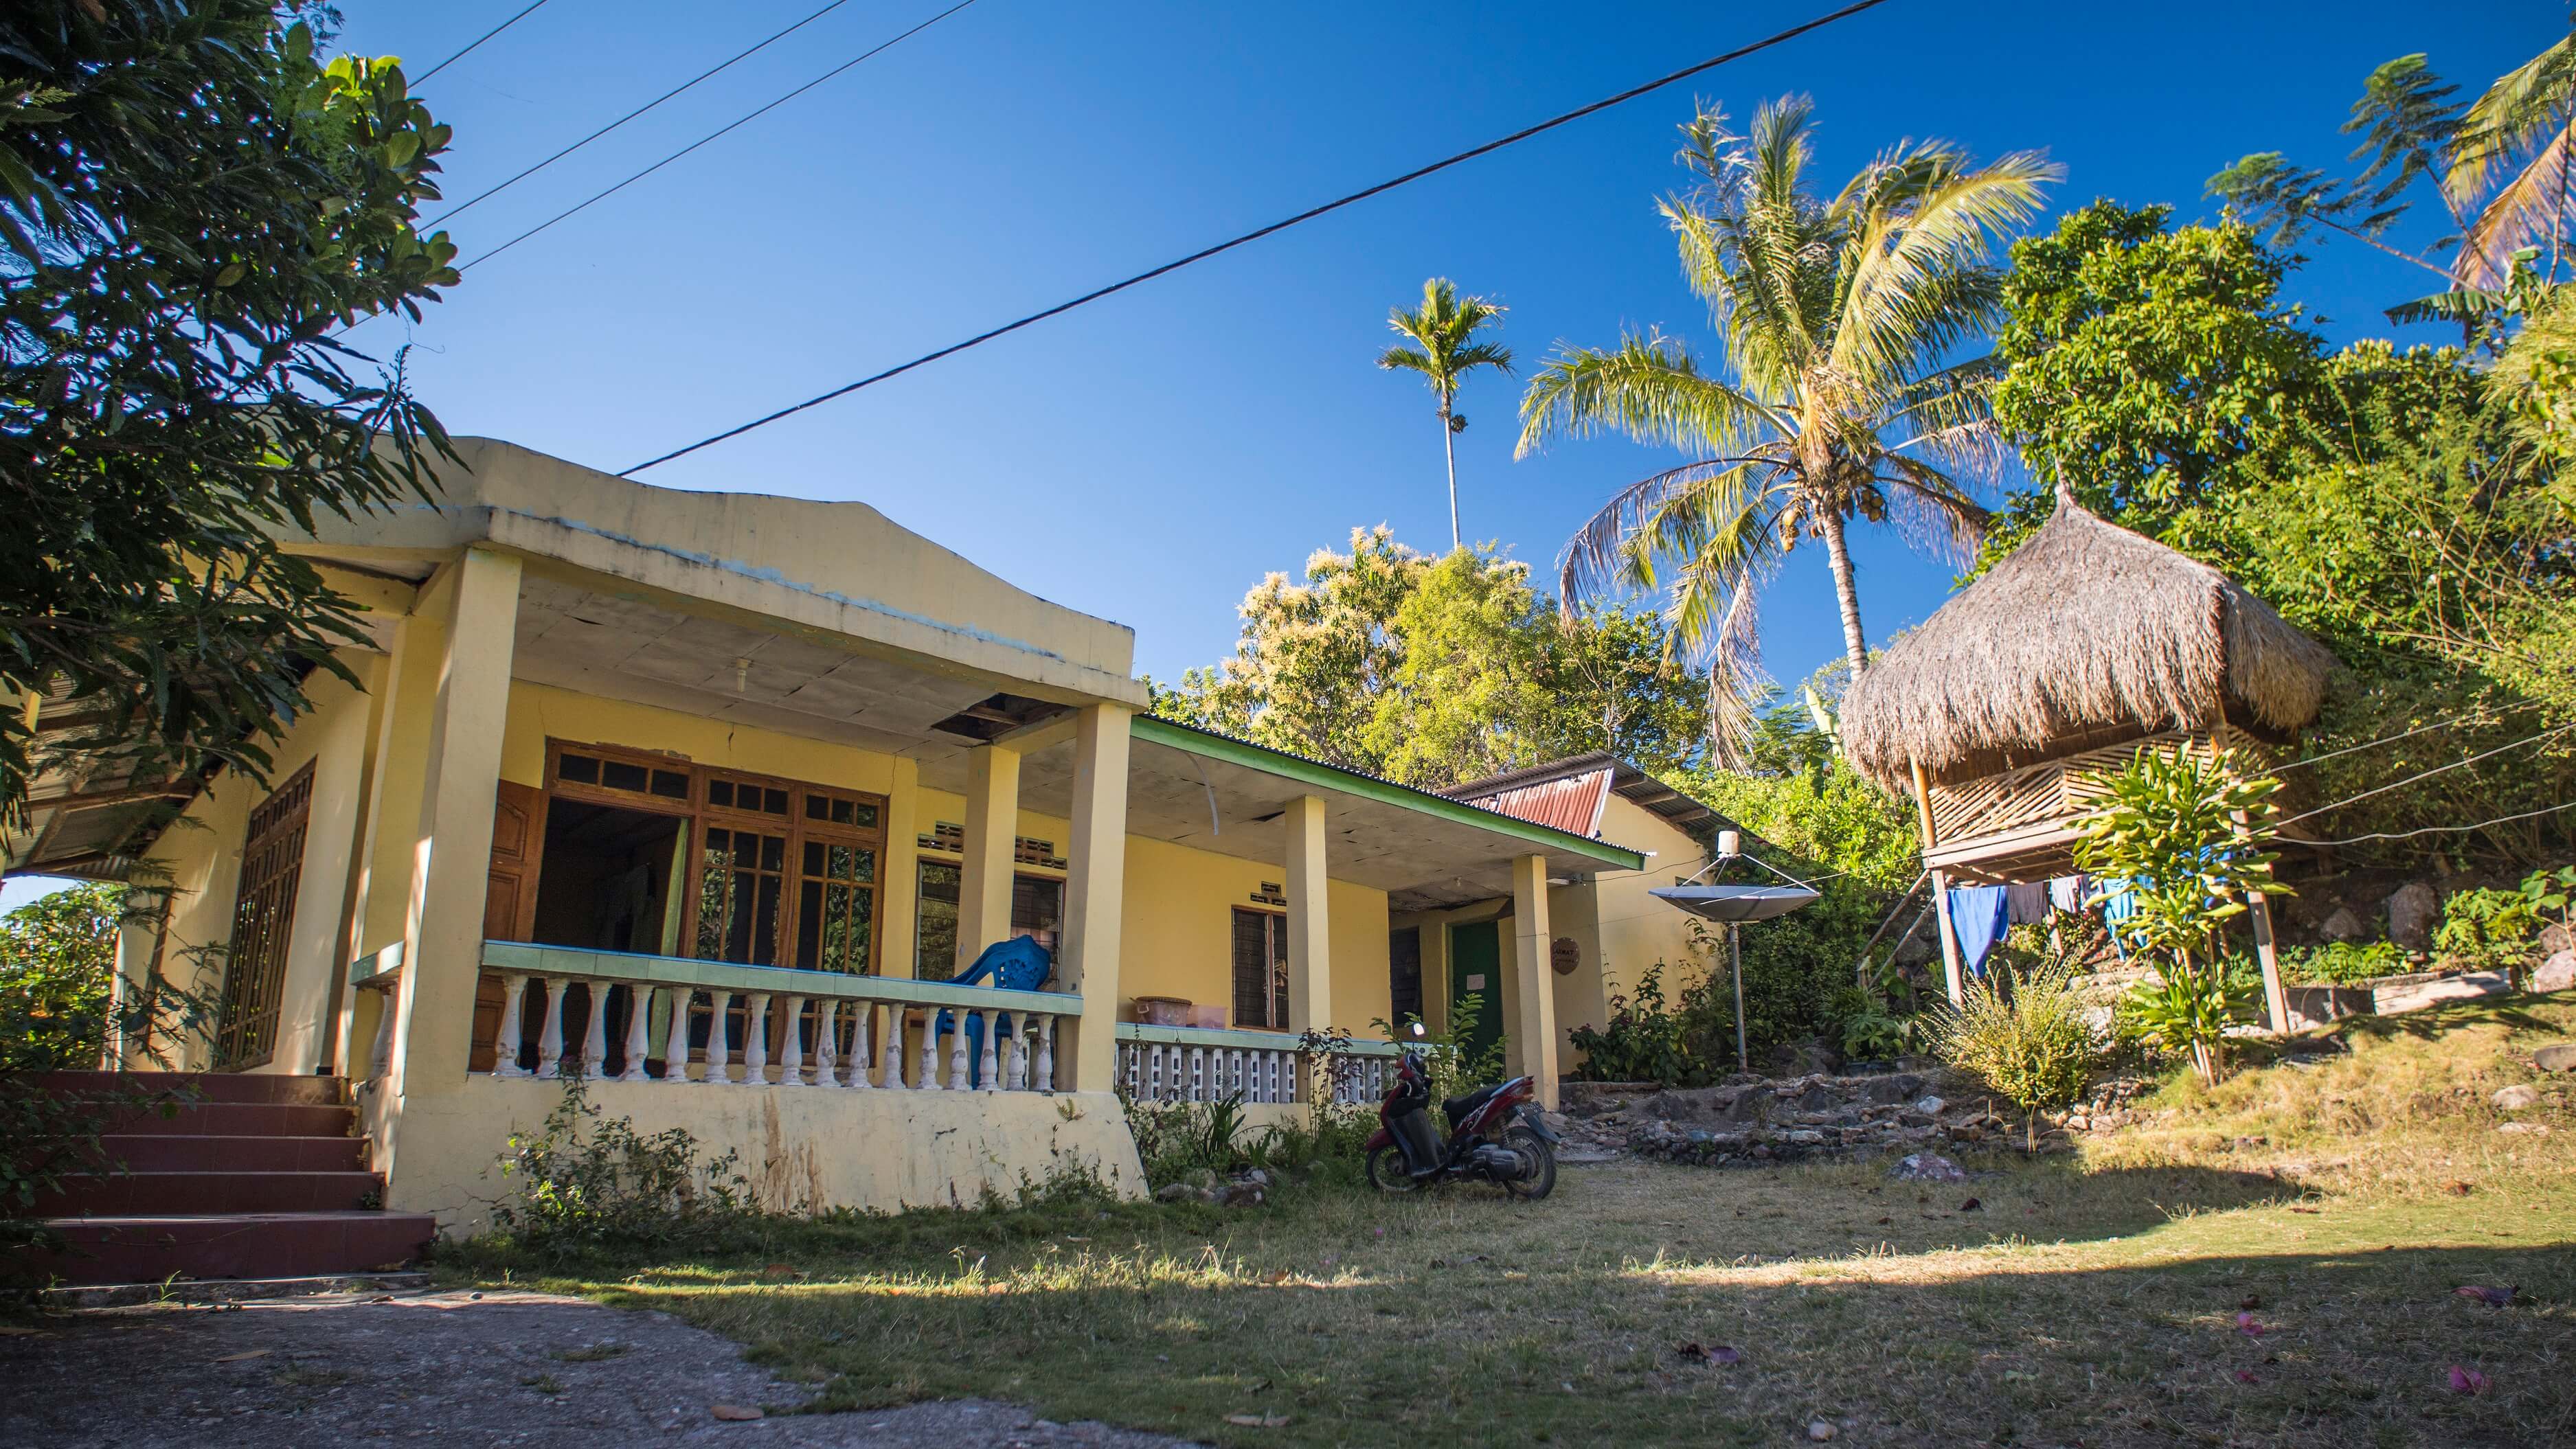 The Senda family home in Taiftob village currently houses the Lakoat.Kujawas library. The treehouse on the right makes a popular space for reading and English classes. Dance classes and theatre workshops are usually held on the lawn. Photo by Andra Fembriarto